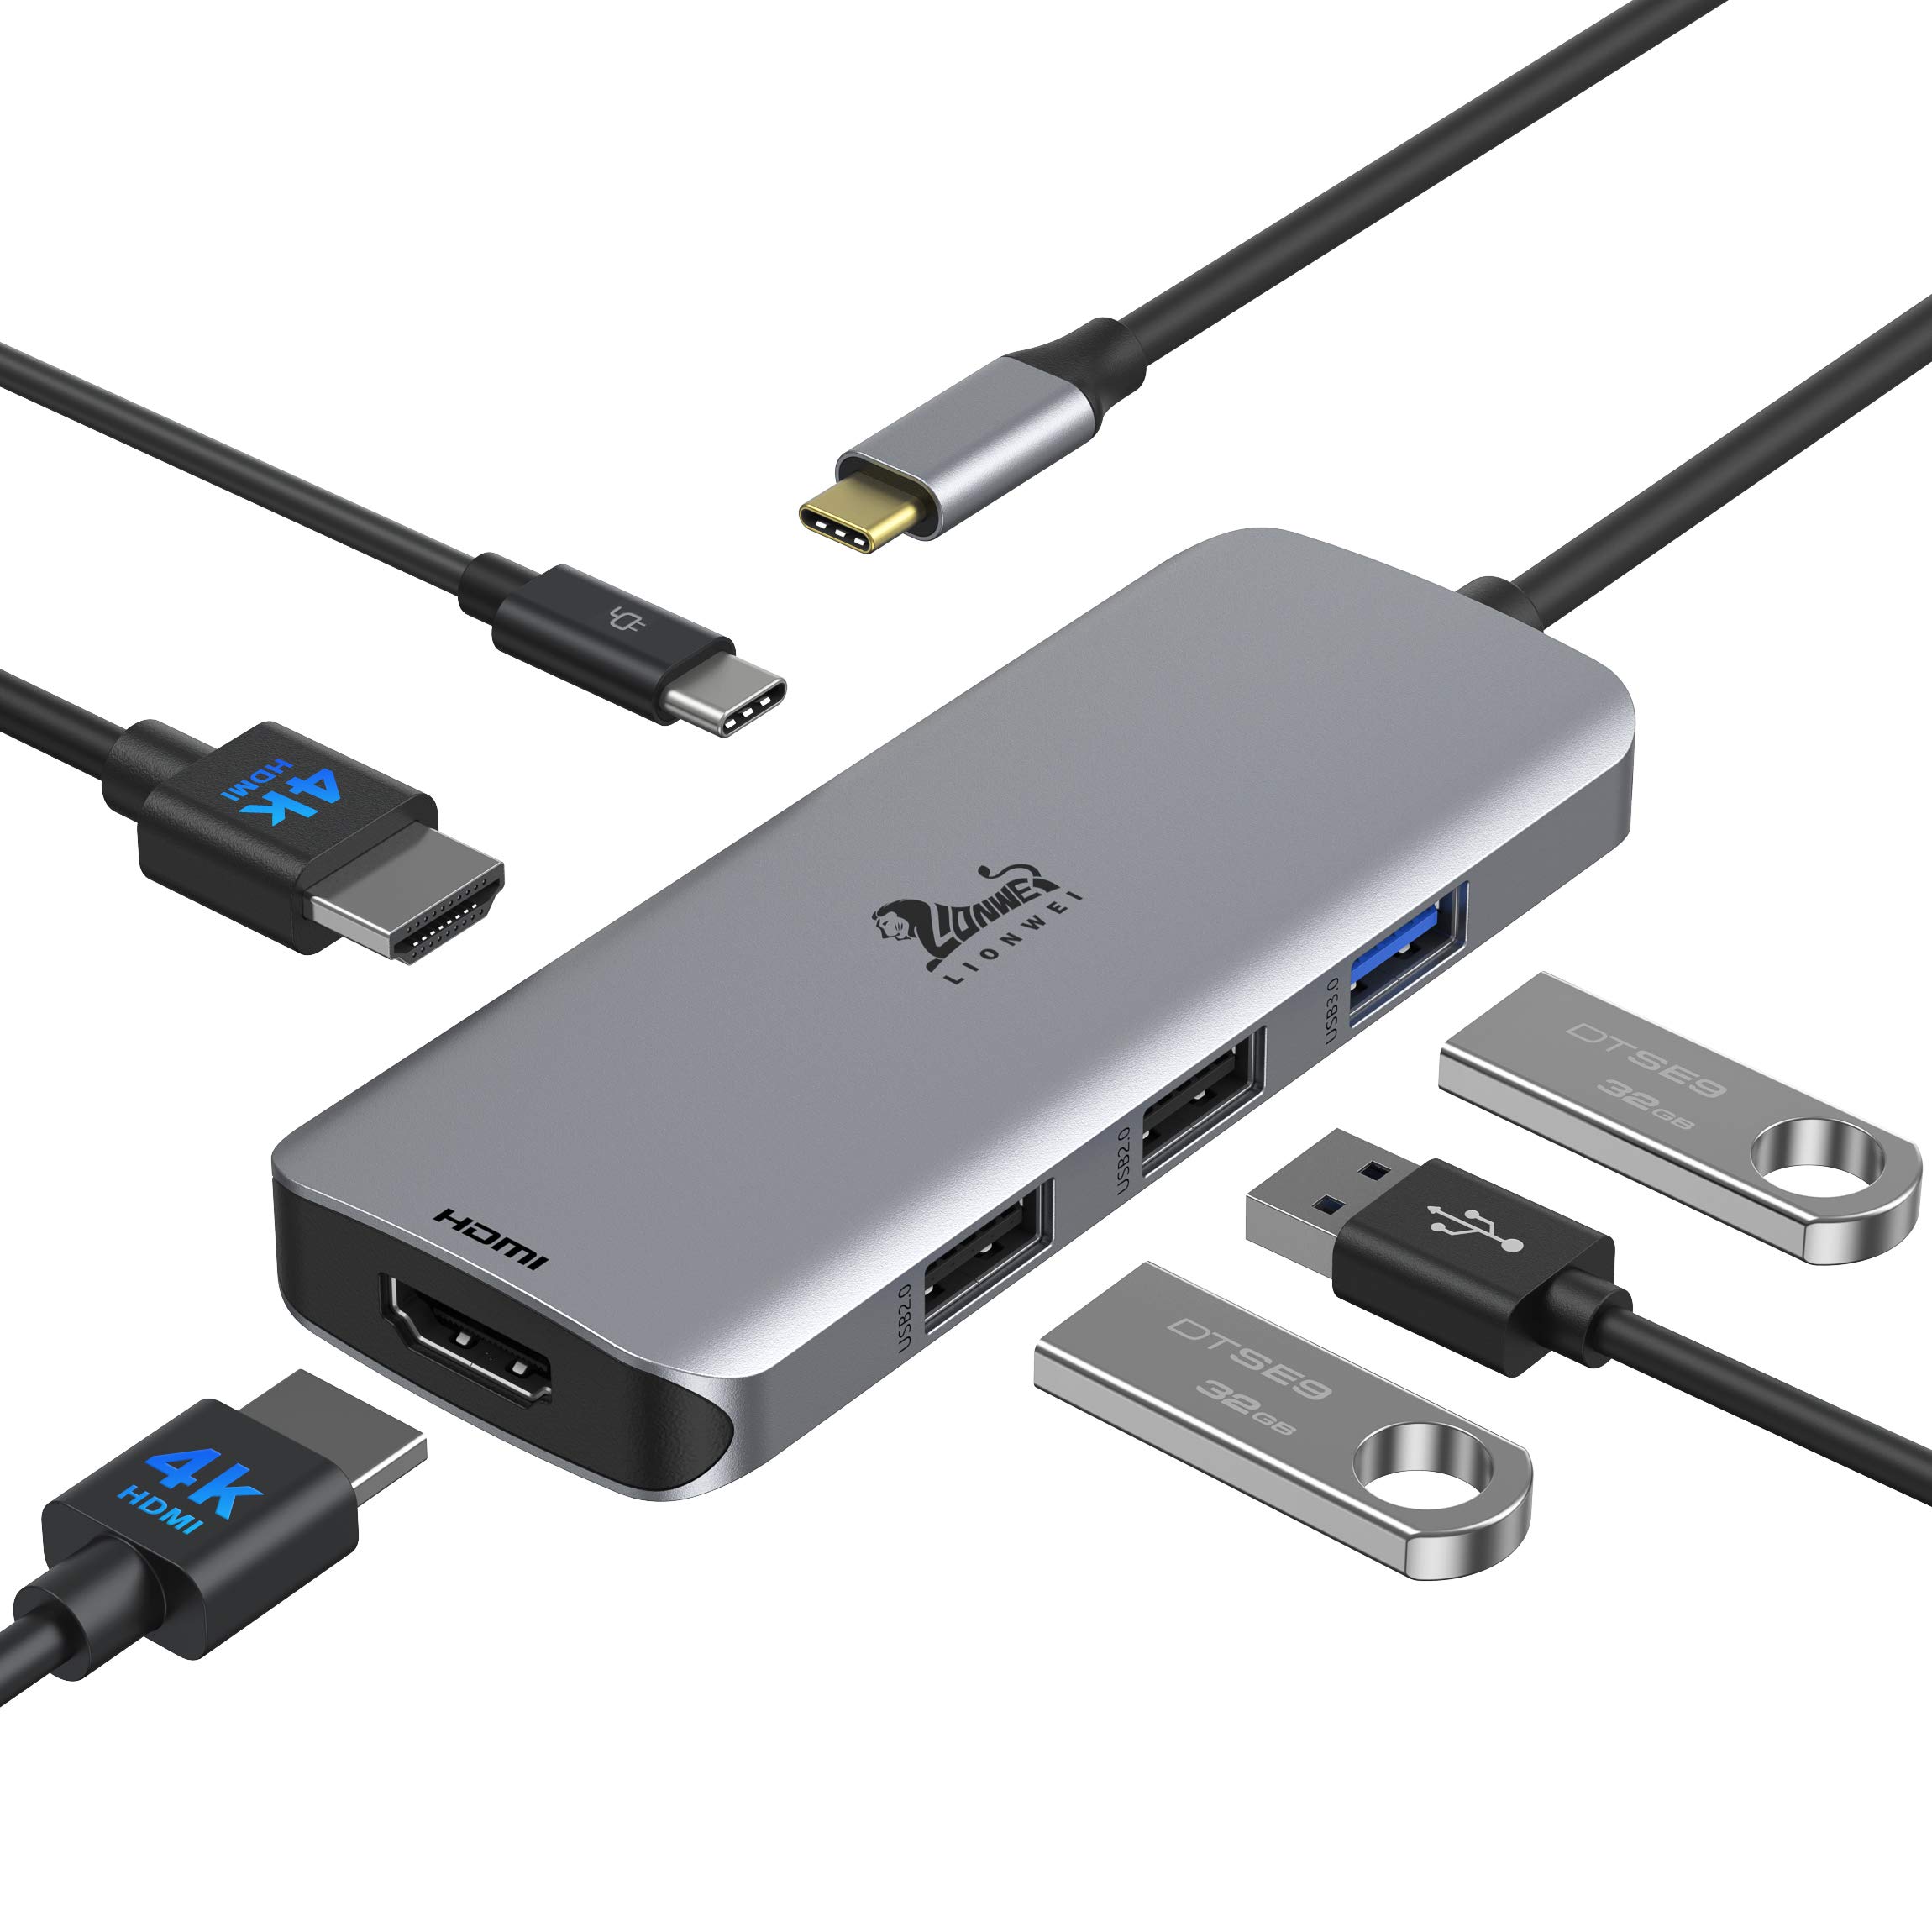 Confirm that the power source provides sufficient power for the device and display
Ensure the adapter is compatible with both the USB-C port and the display